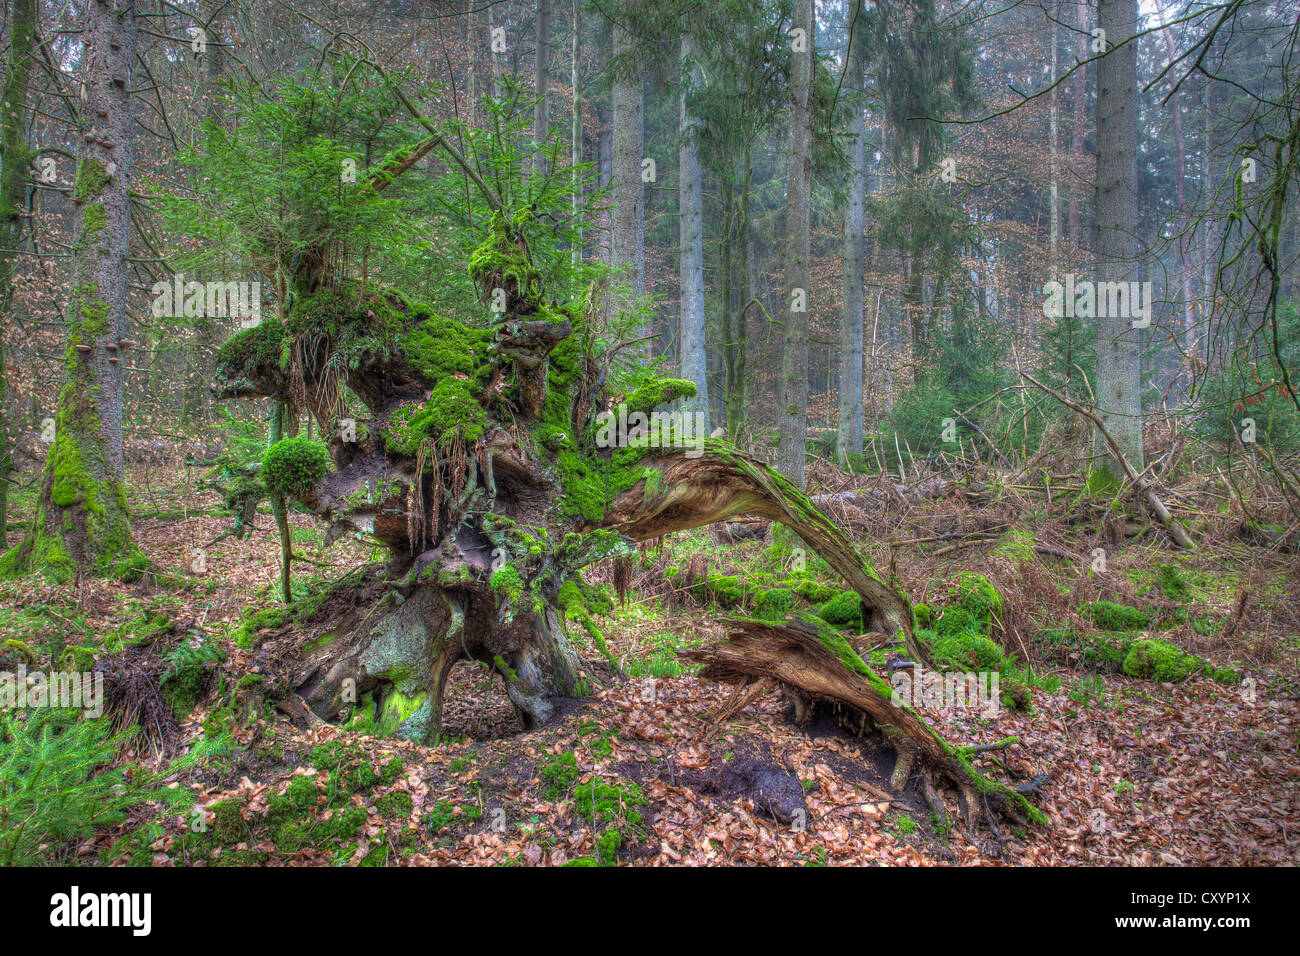 Spruce root, spruce forest, moss, protected forest, near Steinhausen, Baden-Wuerttemberg Stock Photo